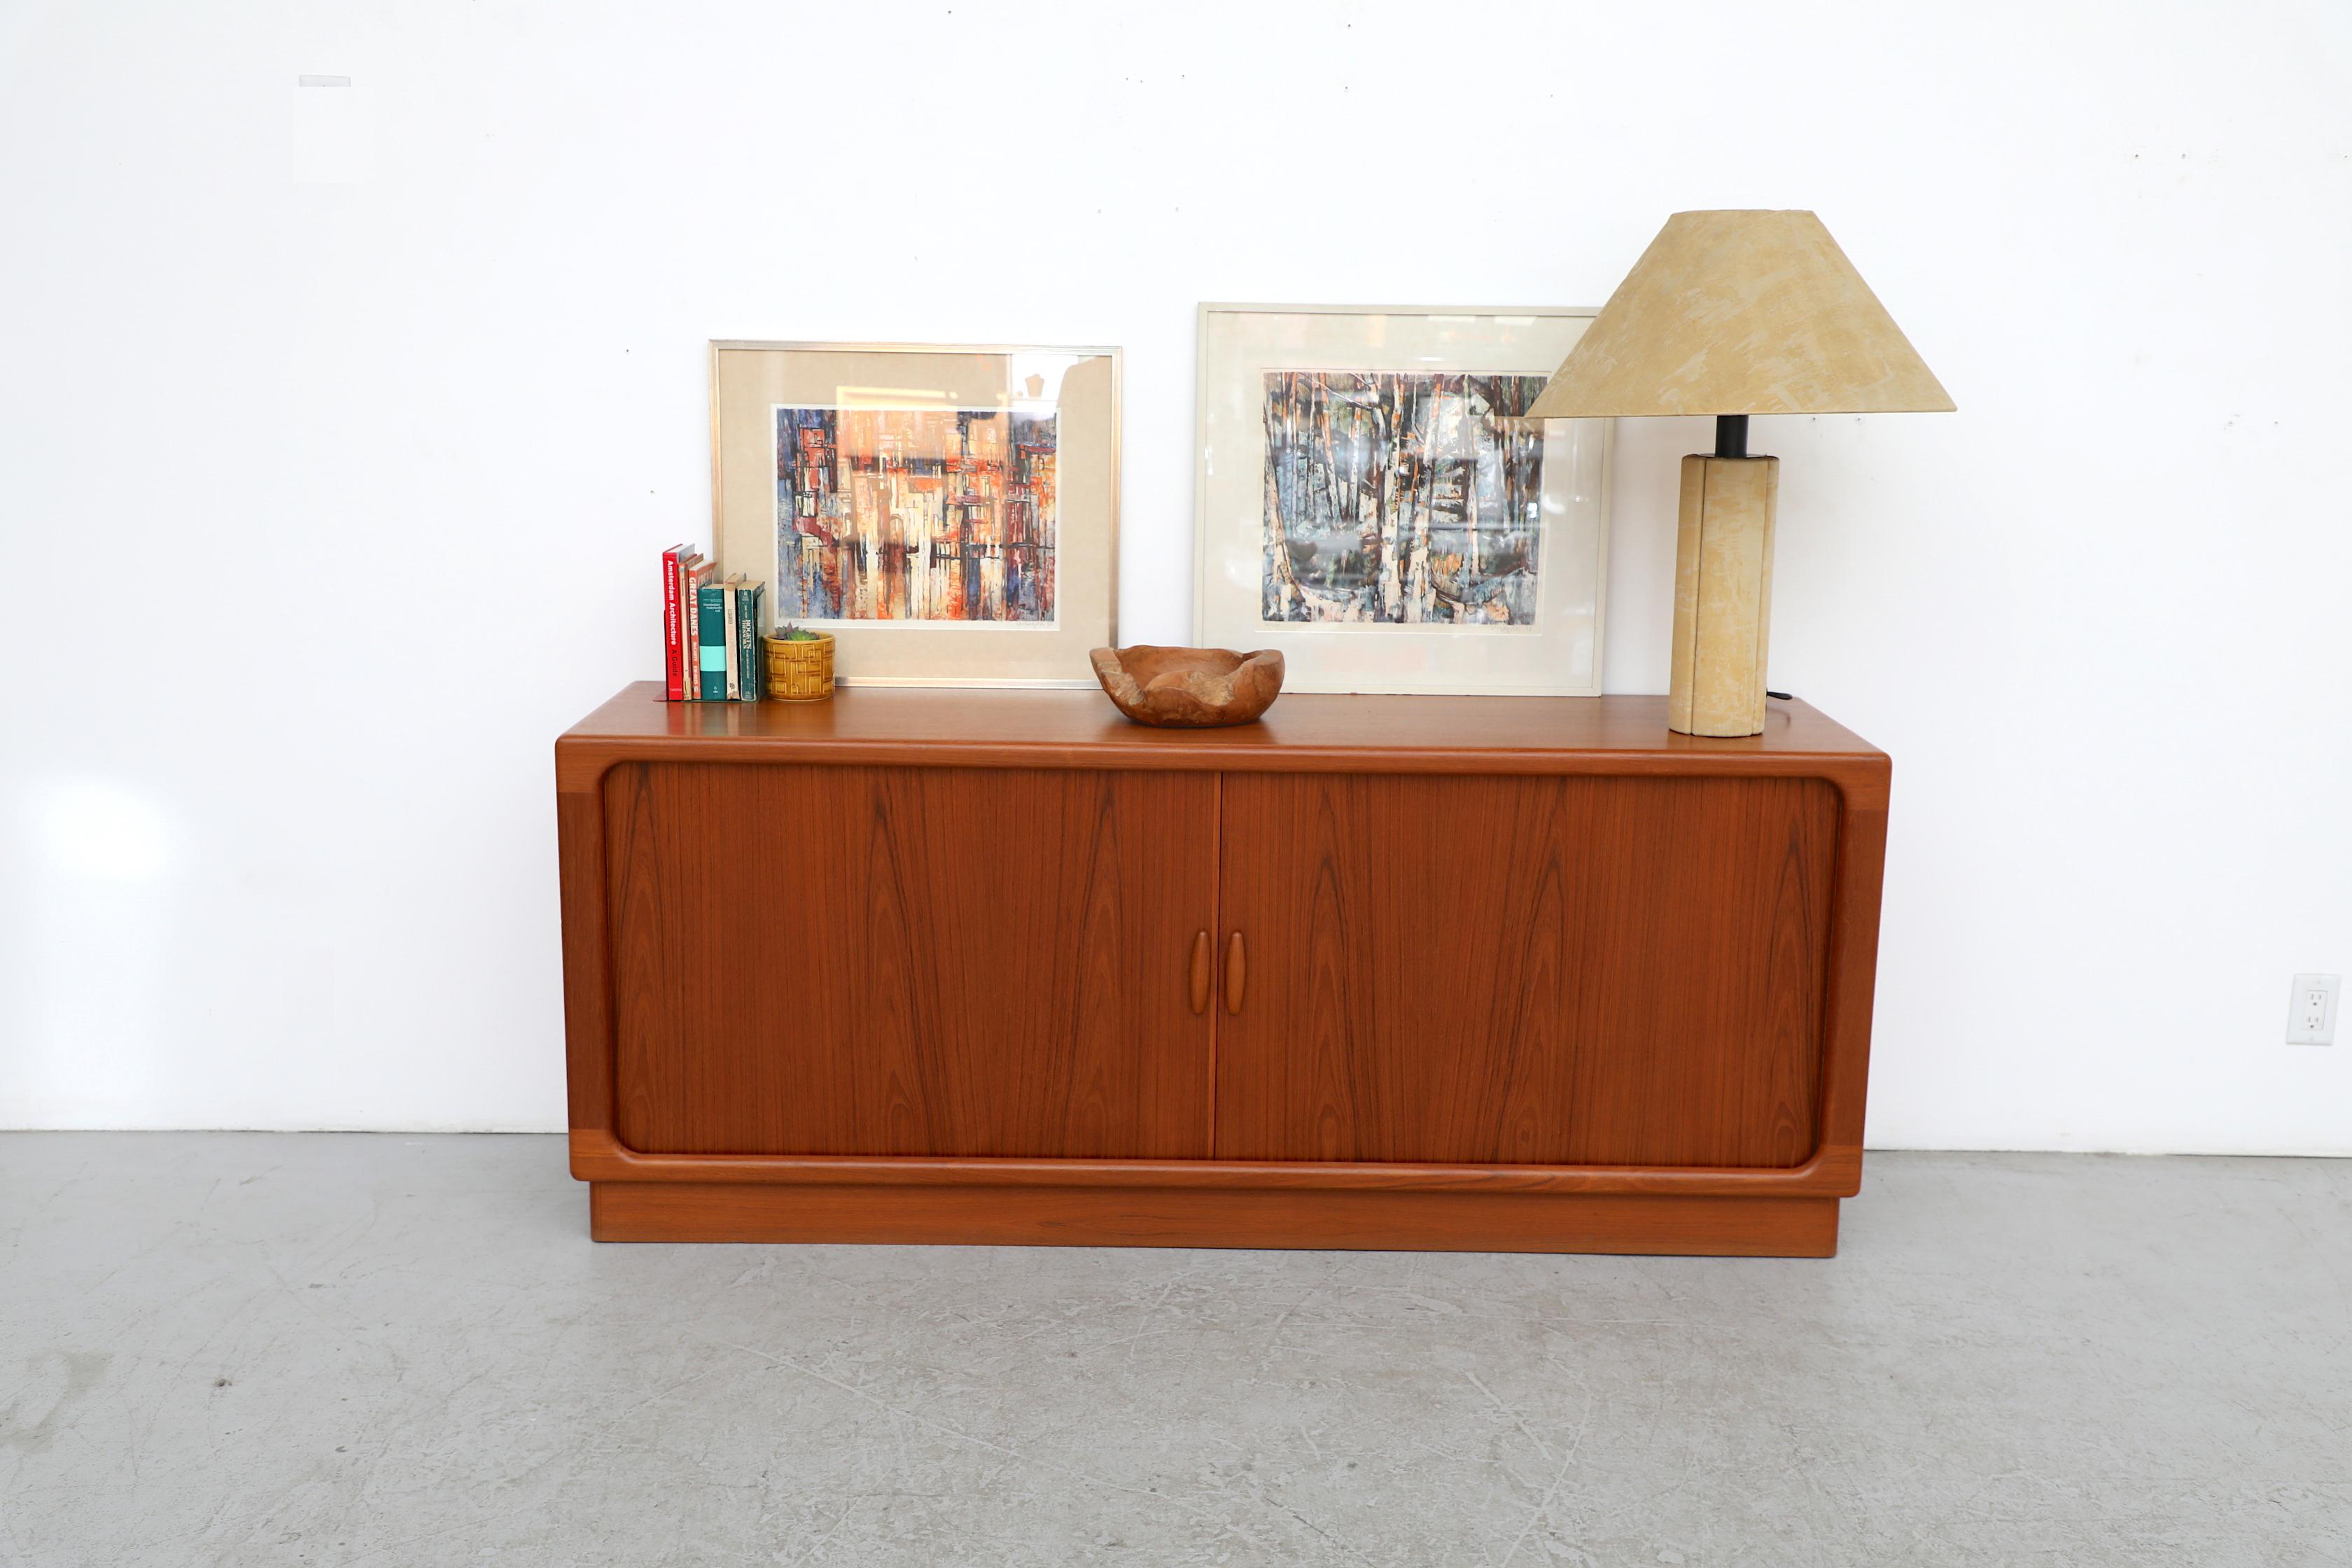 Beautiful 1960's Danish teak credenza with tambour doors manufactured by Dyrlund. The interior has 5 shelves and 5 felt lined pull out drawers with dovetail joints. In good original condition. Wear is consistent with its age and use. 